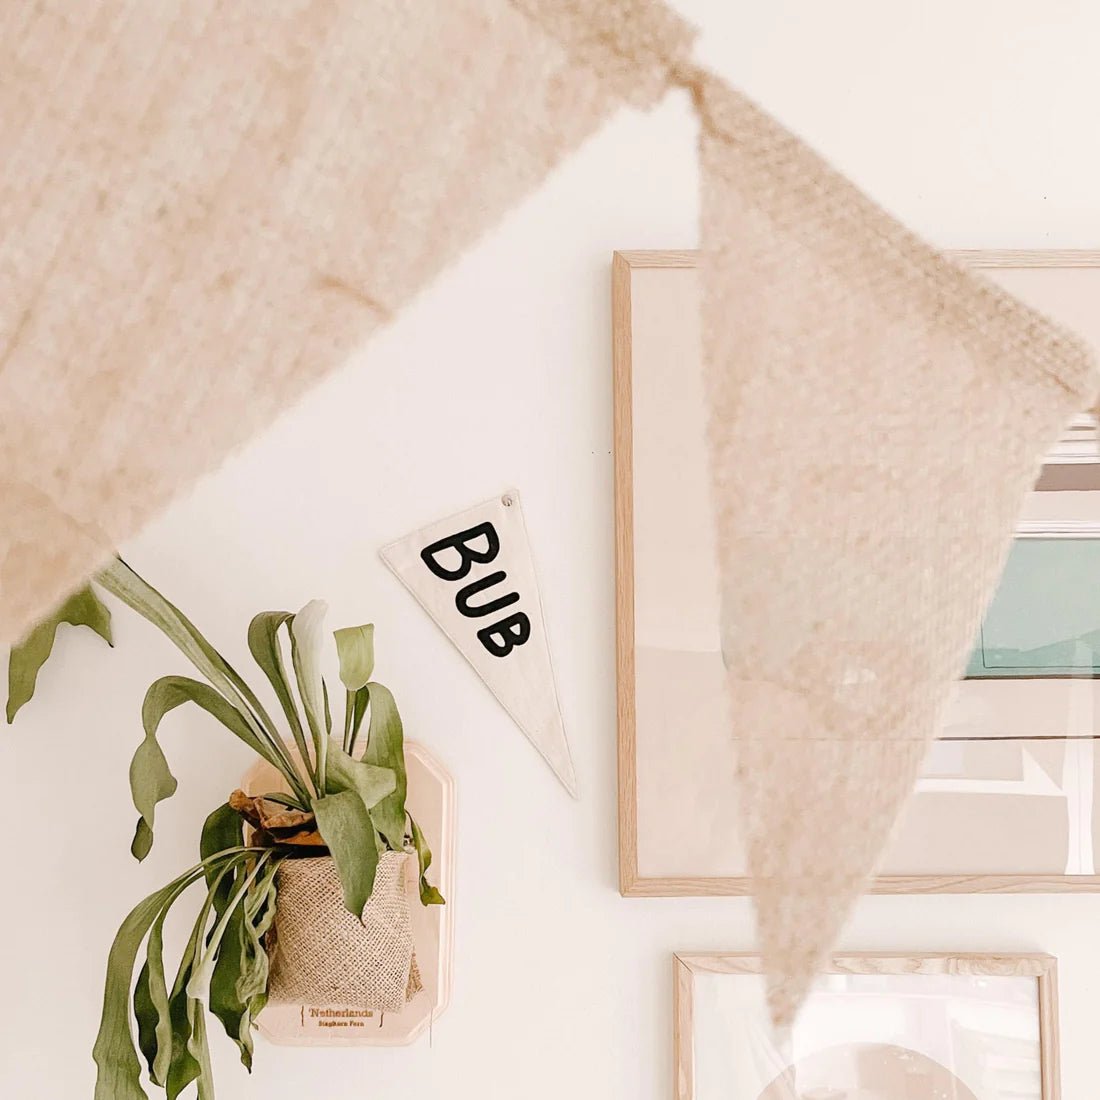 Bub Pennant by Imani Collective